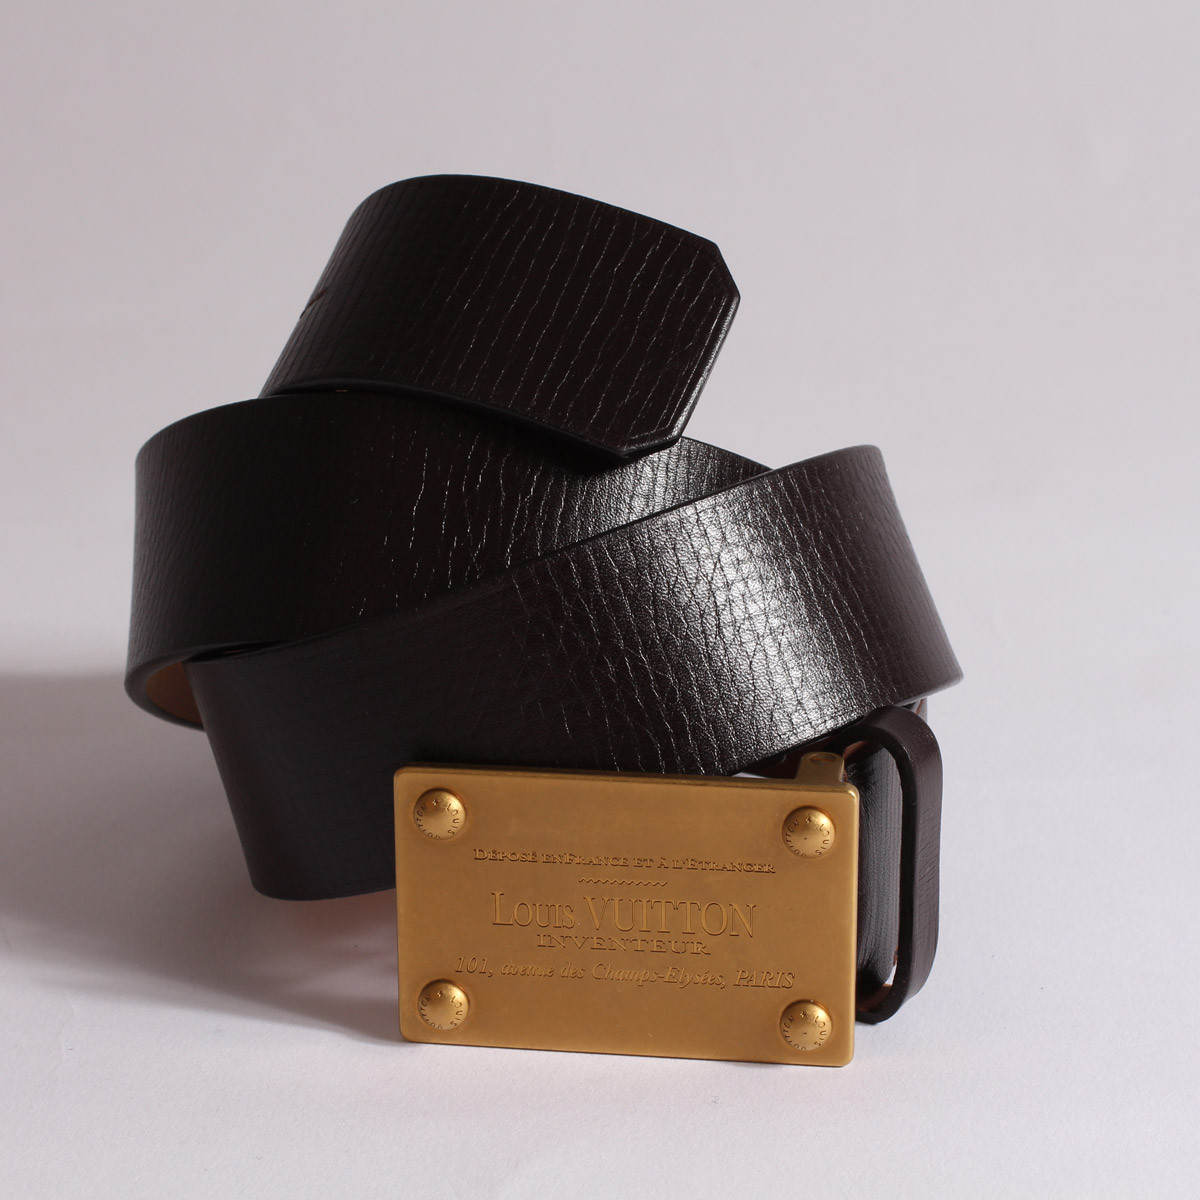 Chocolate Luxurious Louis Vuitton Genuine Leather Golden Buckles